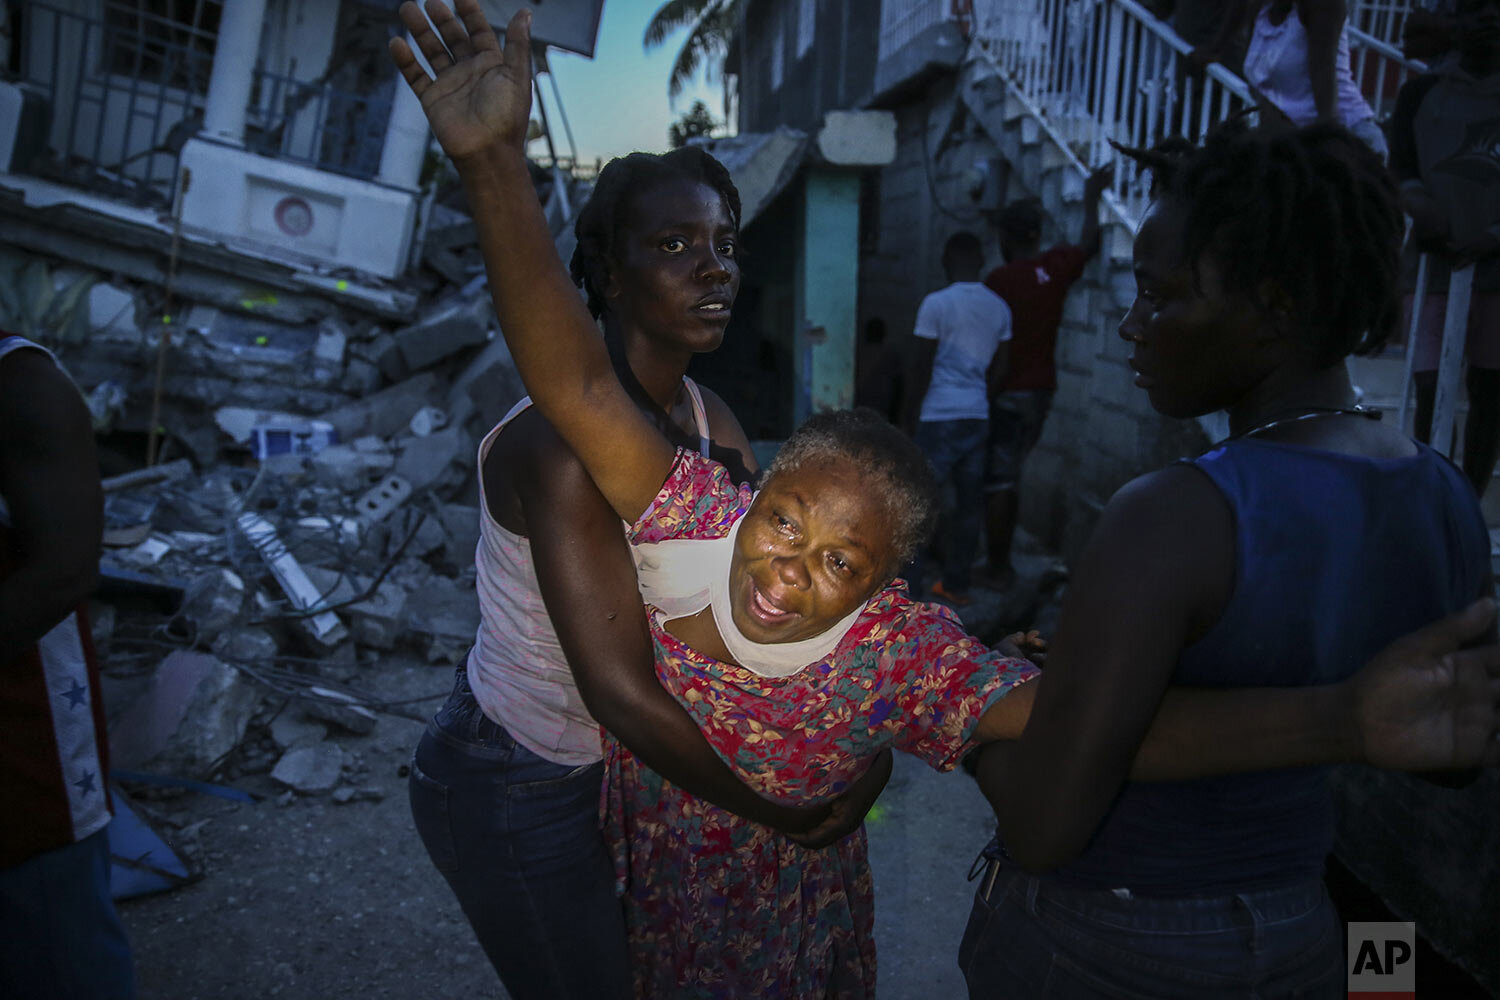  Oxiliene Morency cries out after the body of her 7-year-old-daughter Esther Daniel was recovered from the rubble of their home destroyed by the 7.2 magnitude earthquake in Les Cayes, Haiti, Aug. 14, 2021. (AP Photo /Joseph Odelyn) 